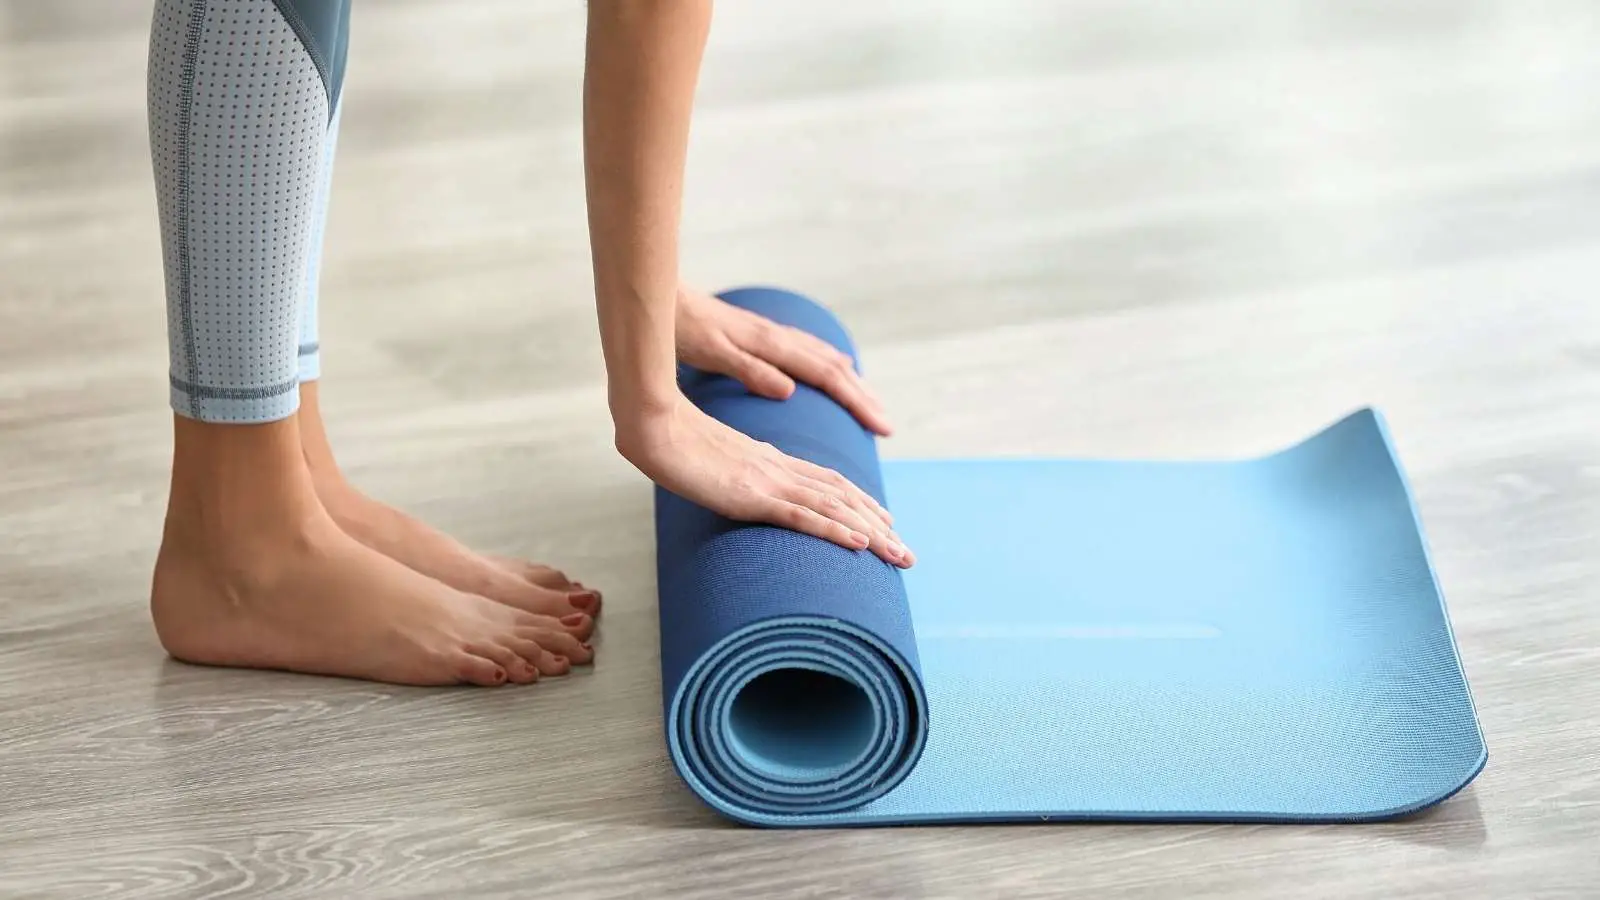 Yoga mat keeps rolling up? Here is what to do